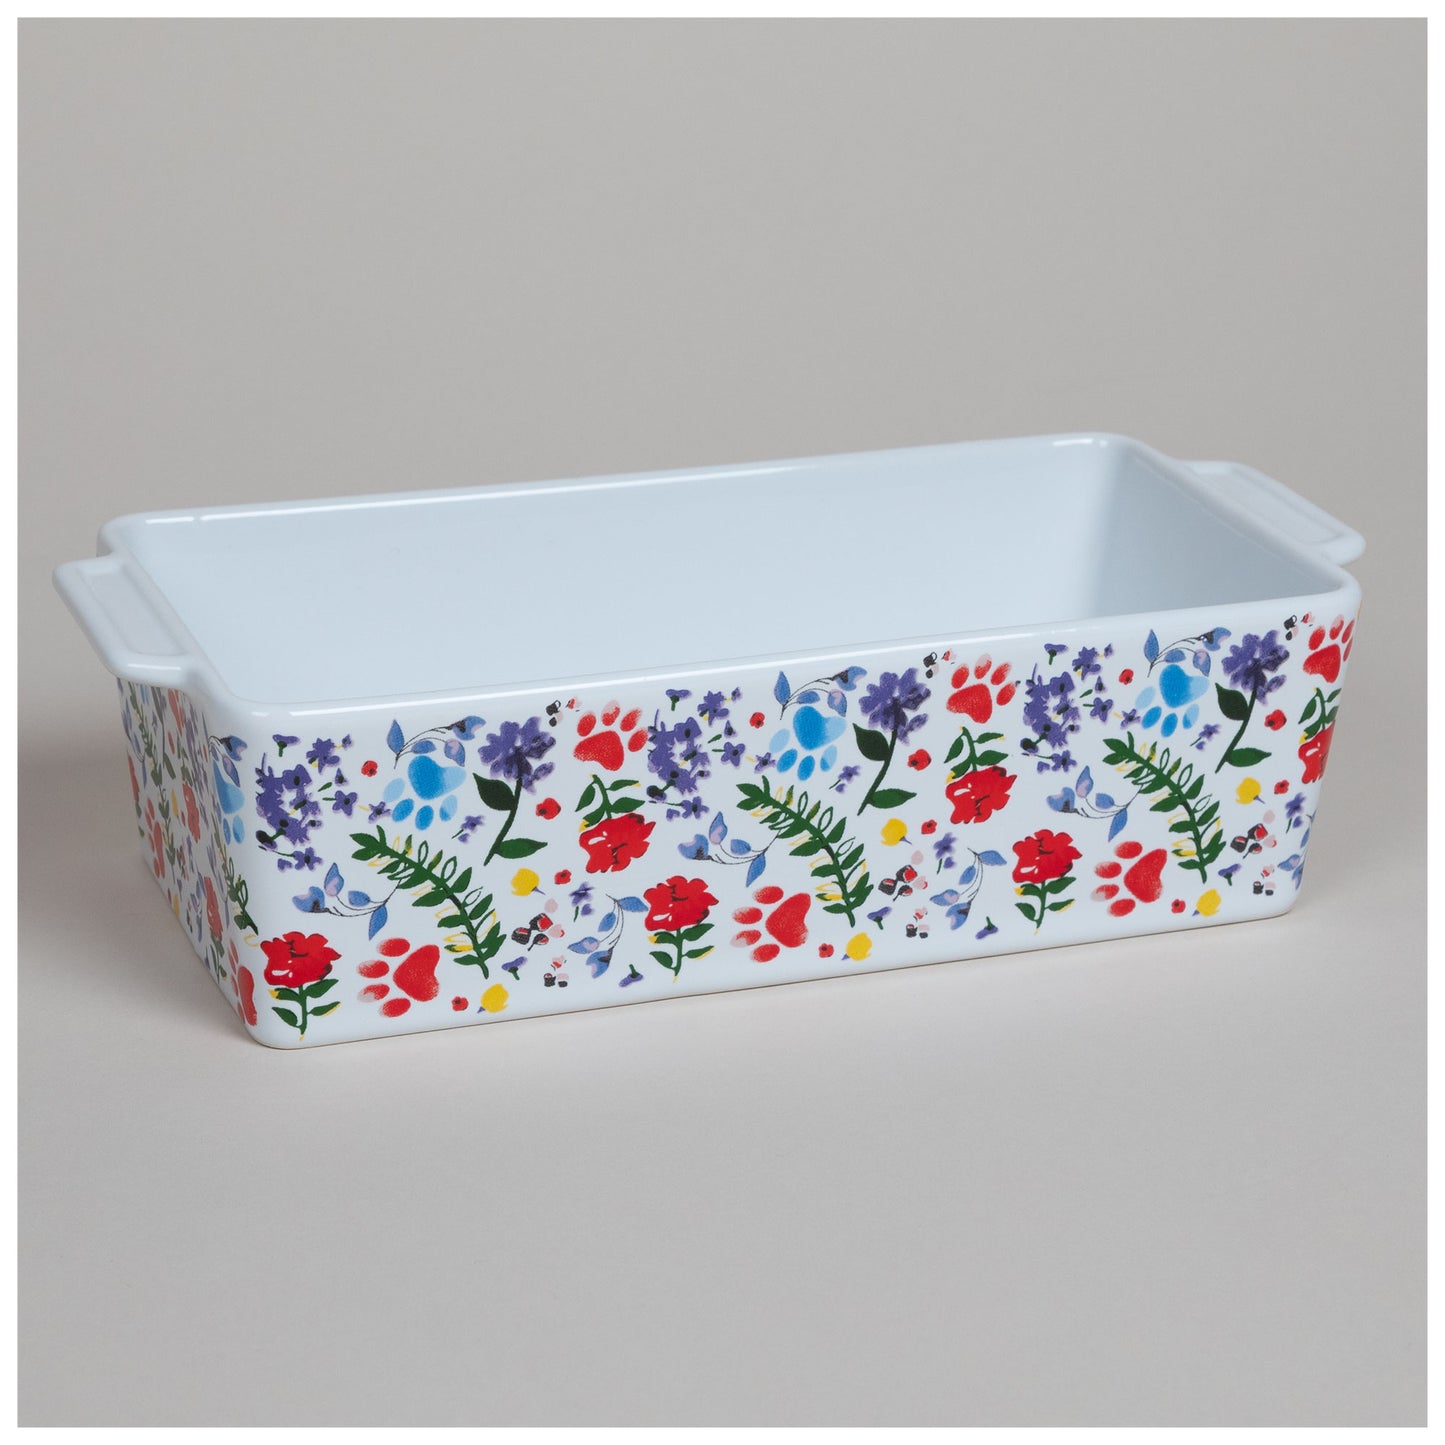 Made with Love Paw Print Ceramic Loaf Pan